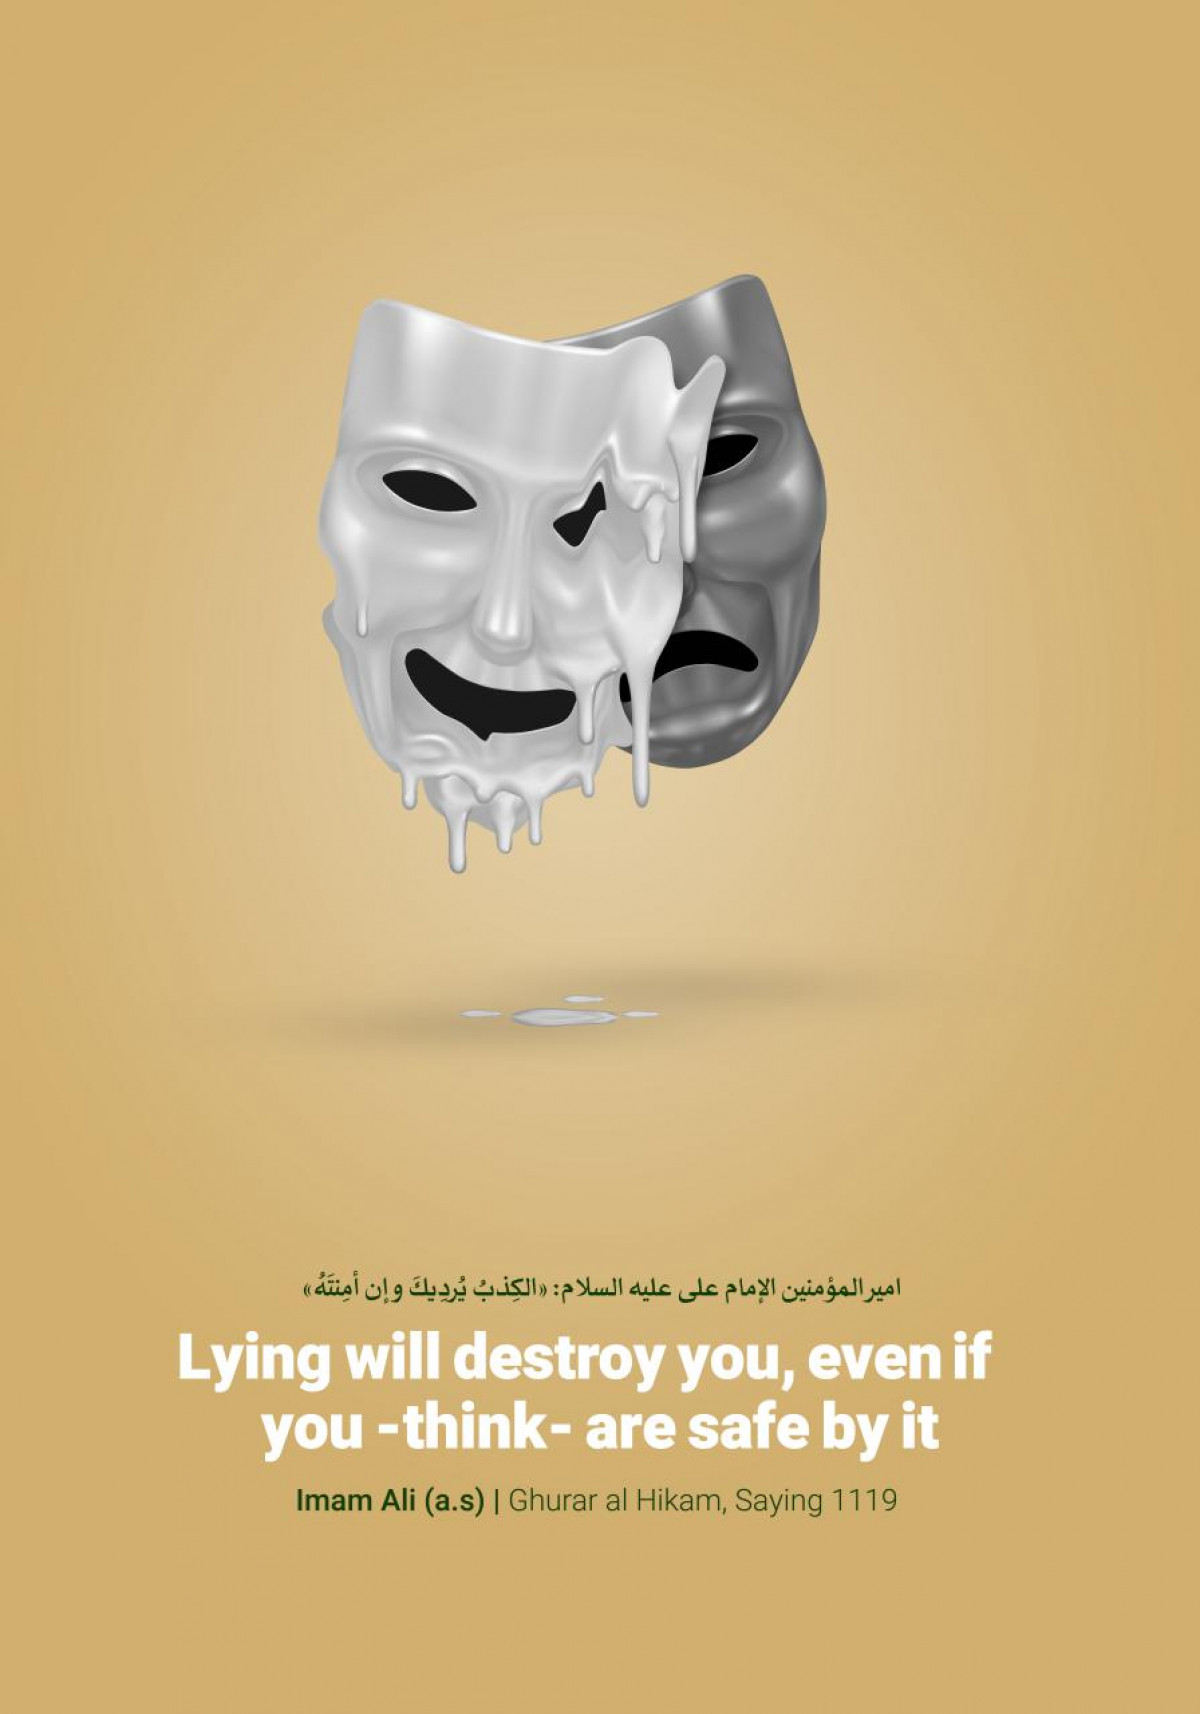 Lying will destroy you, even if you-think- are safe by it